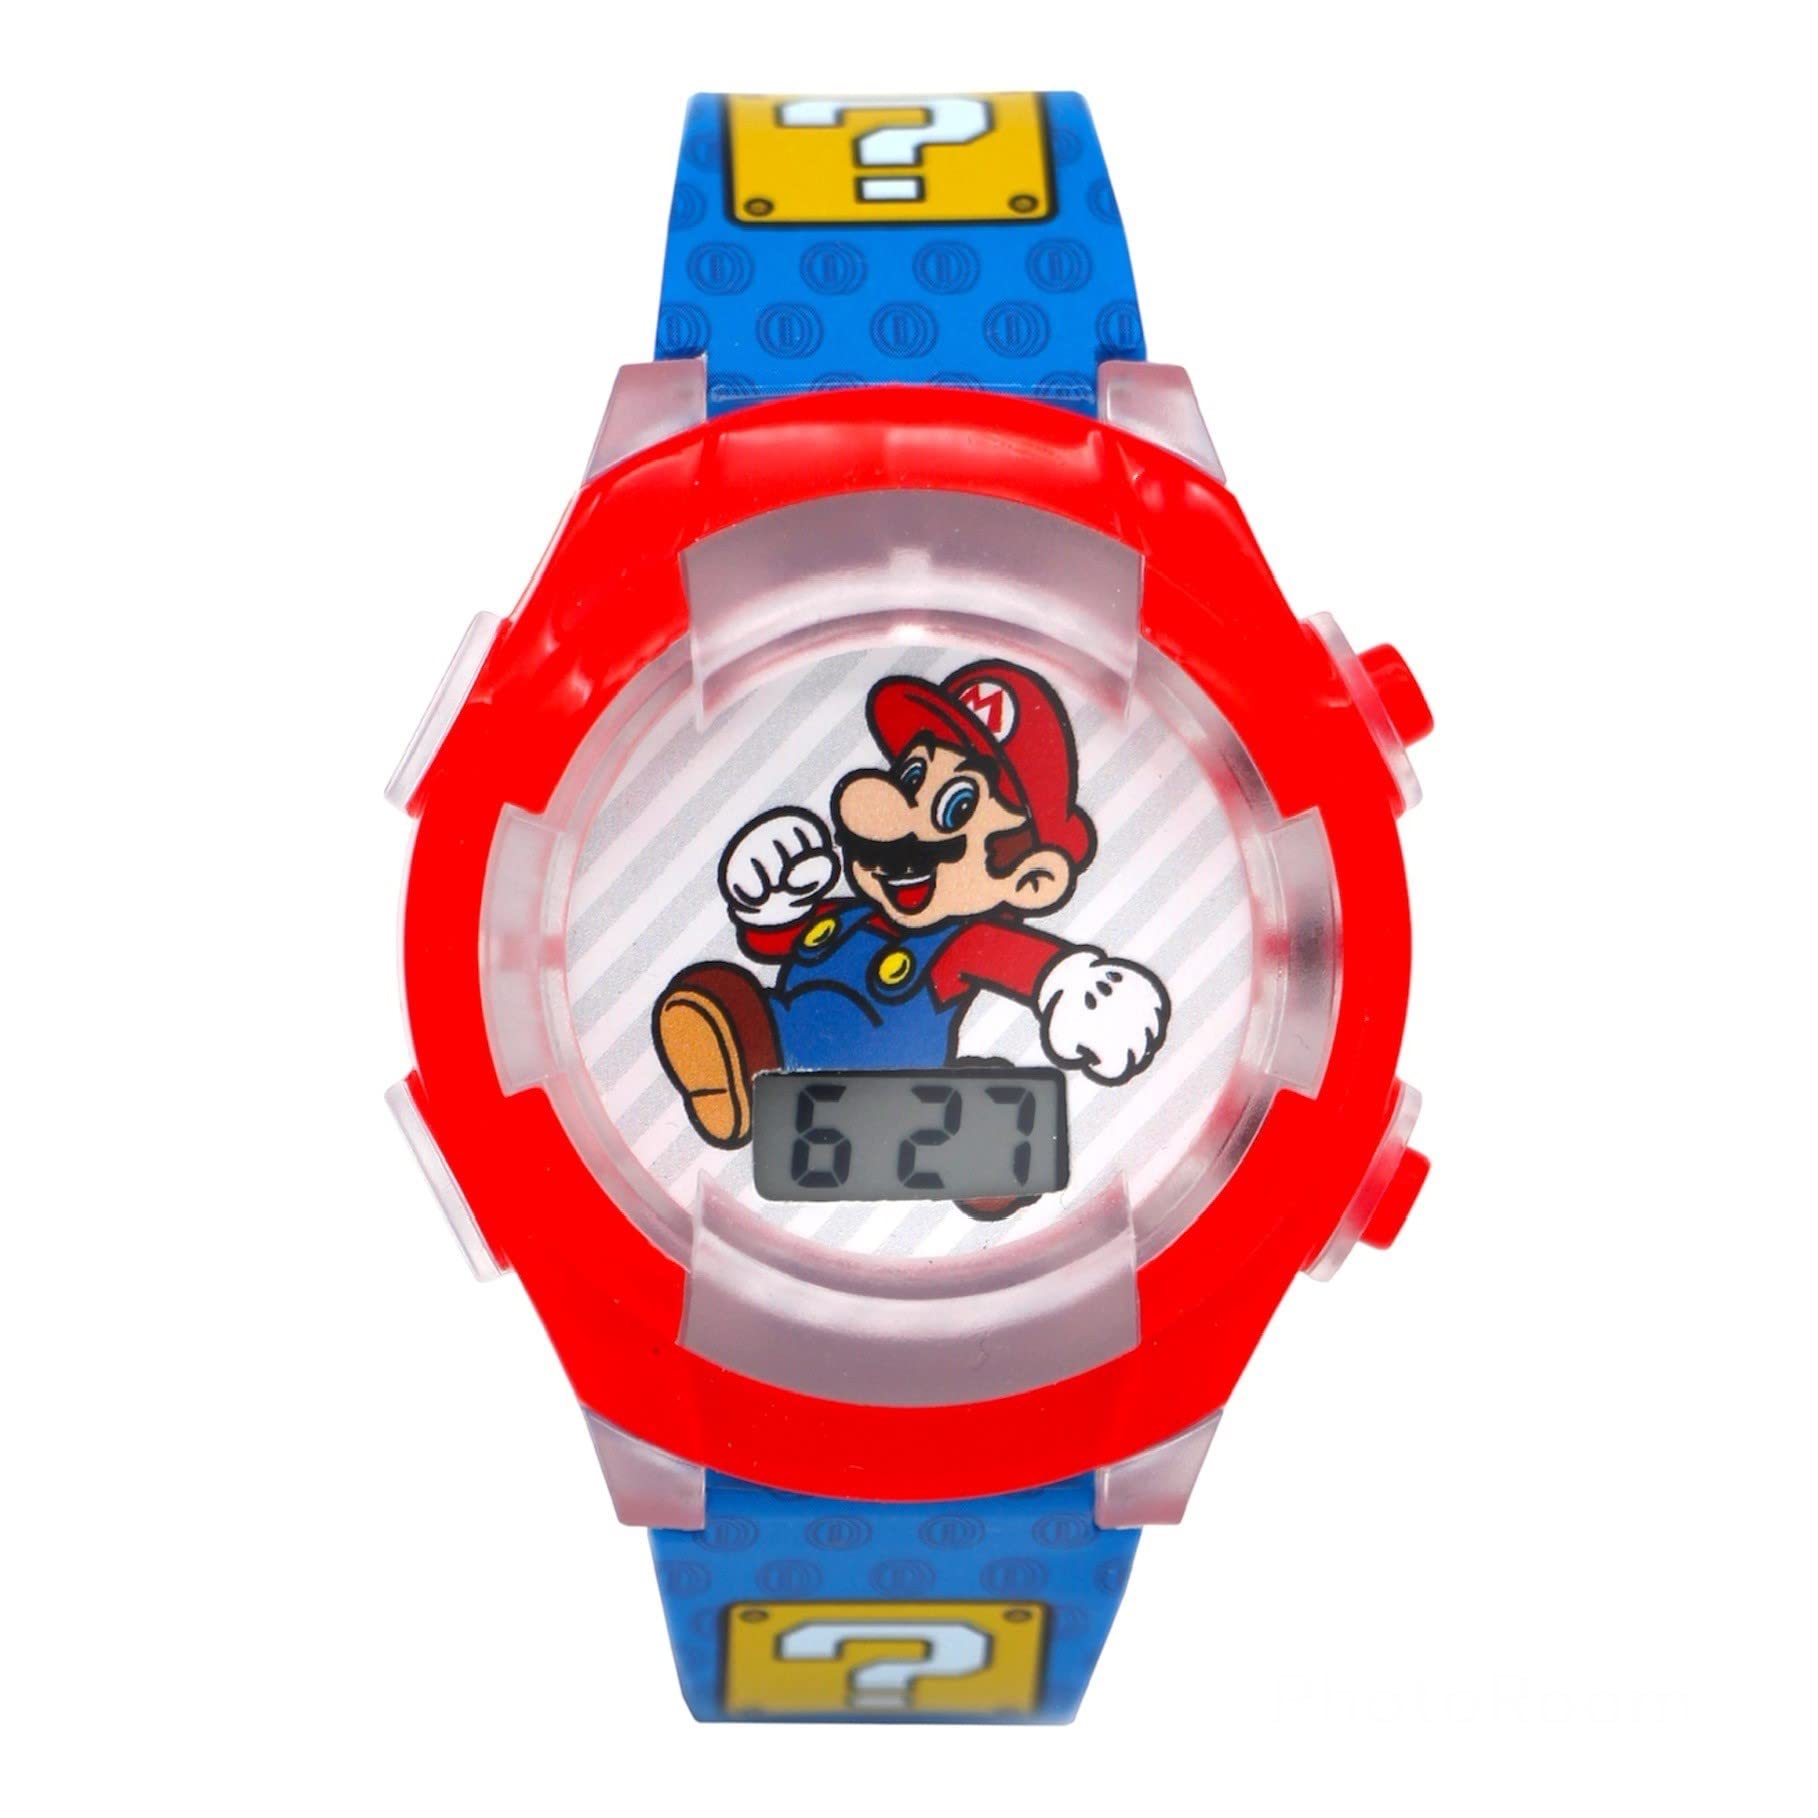 Accutime Kids Nintendo Super Mario Digital Flashing LCD Quartz Childrens Wrist Watch for Boys, Girls, Toddlers with Red and Blue Multicolor Strap (Model: GSM4198AZ)